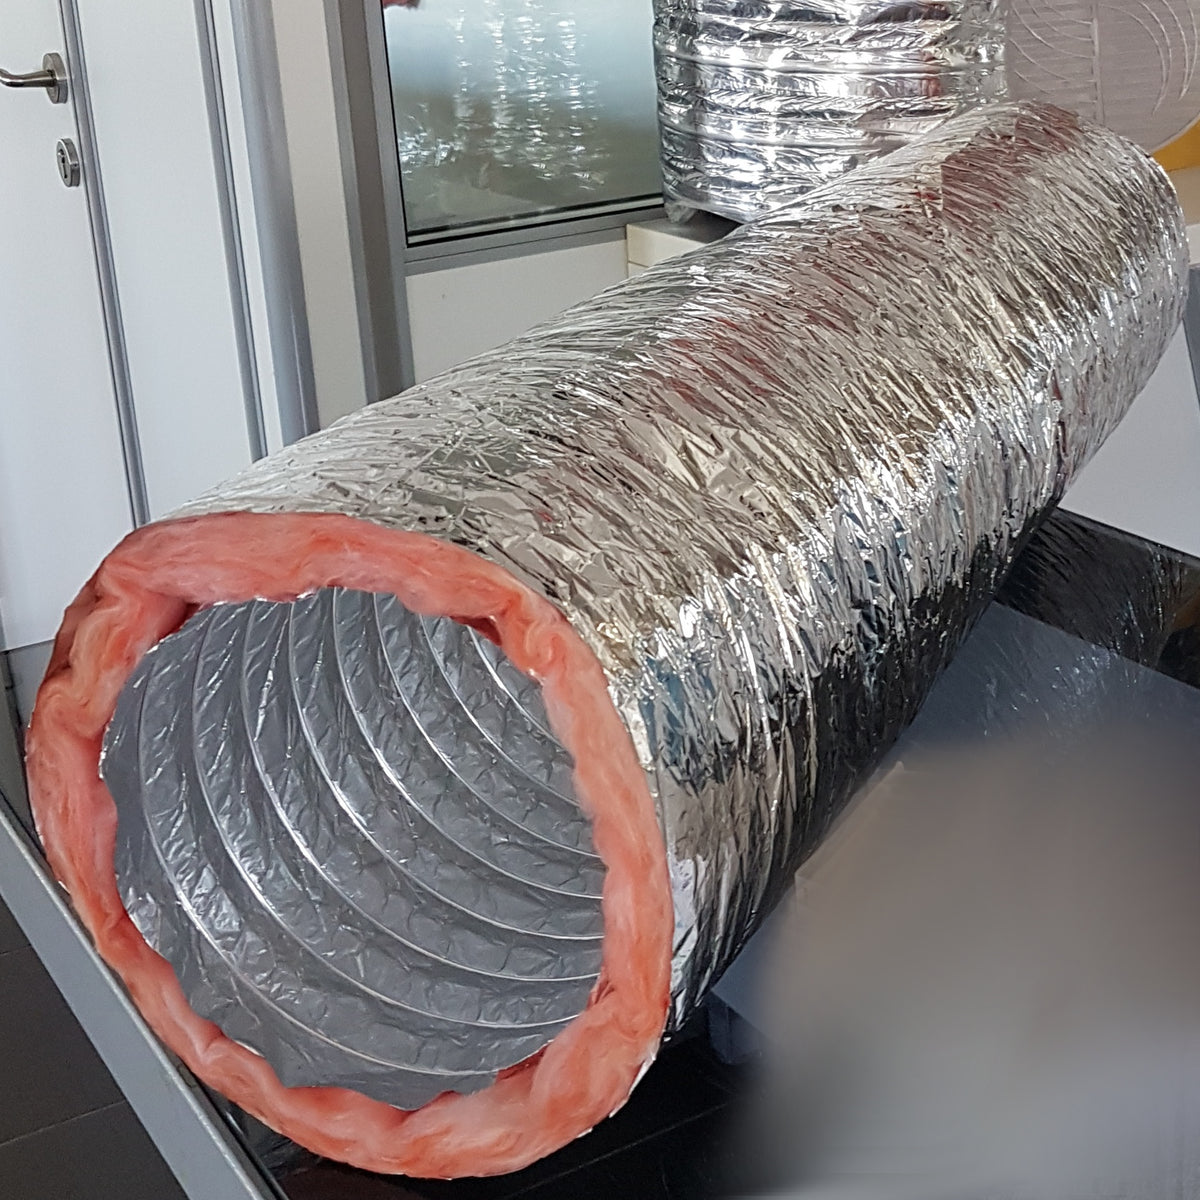 16&quot; Inch Aluminum Hose Flexible Insulated R-8.0 Air Duct Pipe for Rigid HVAC Flex Ductwork Insulation - 25&#39; Feet Long